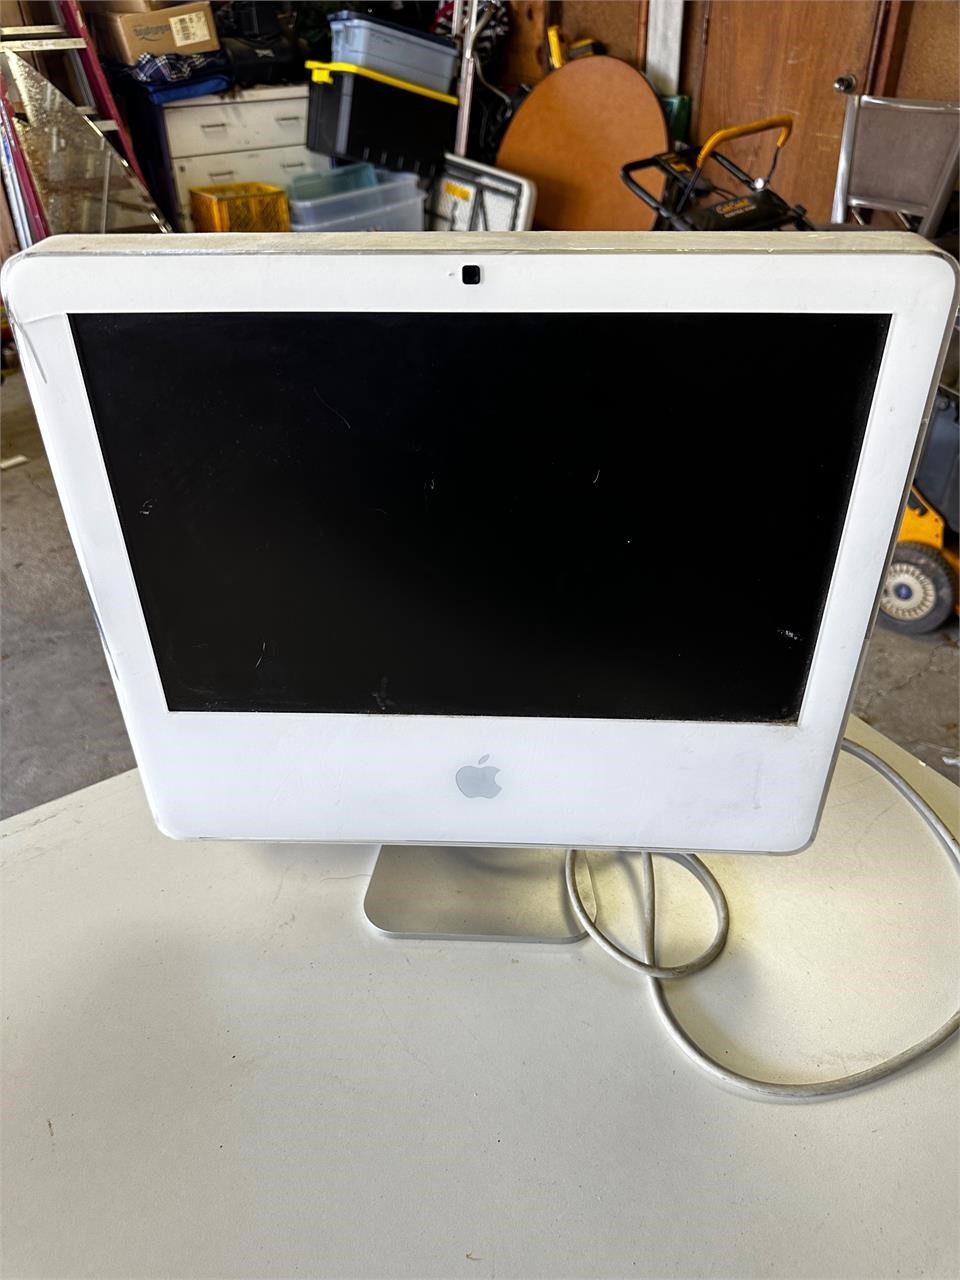 iMac computer with cord - cracked corner